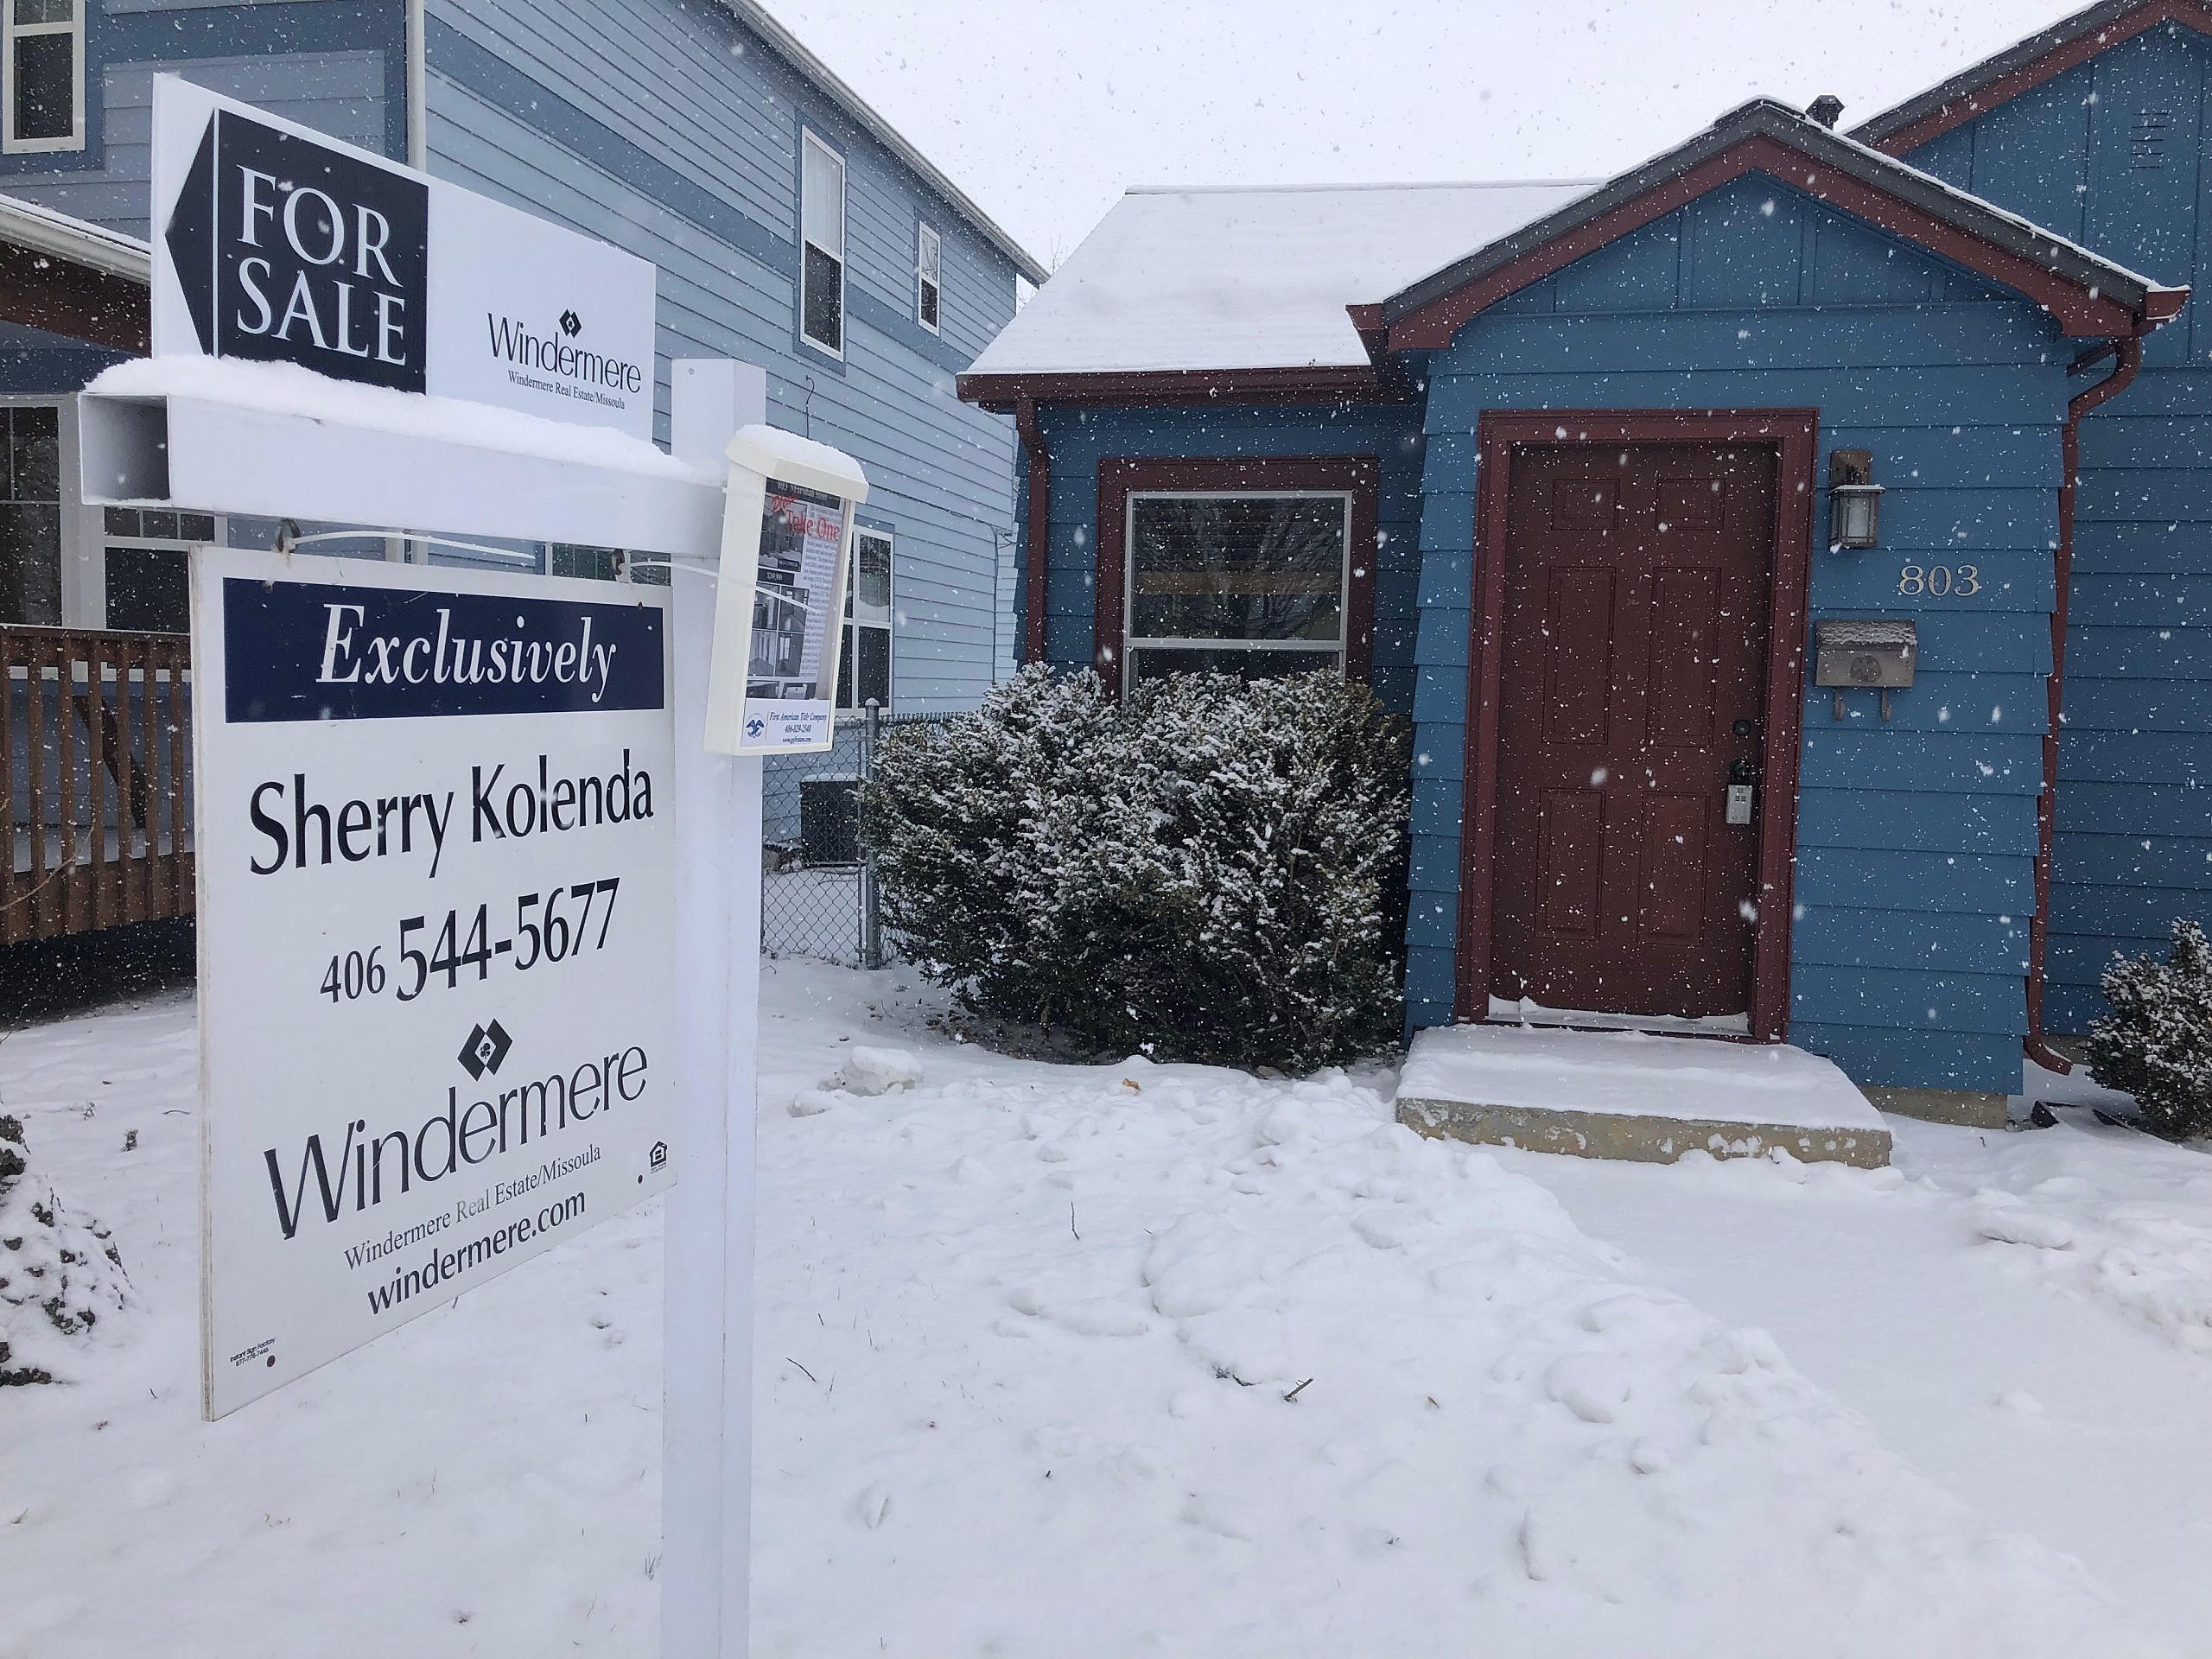 Montana S Zoom Boom Demand For Housing May Be Here For Years Missoula Current